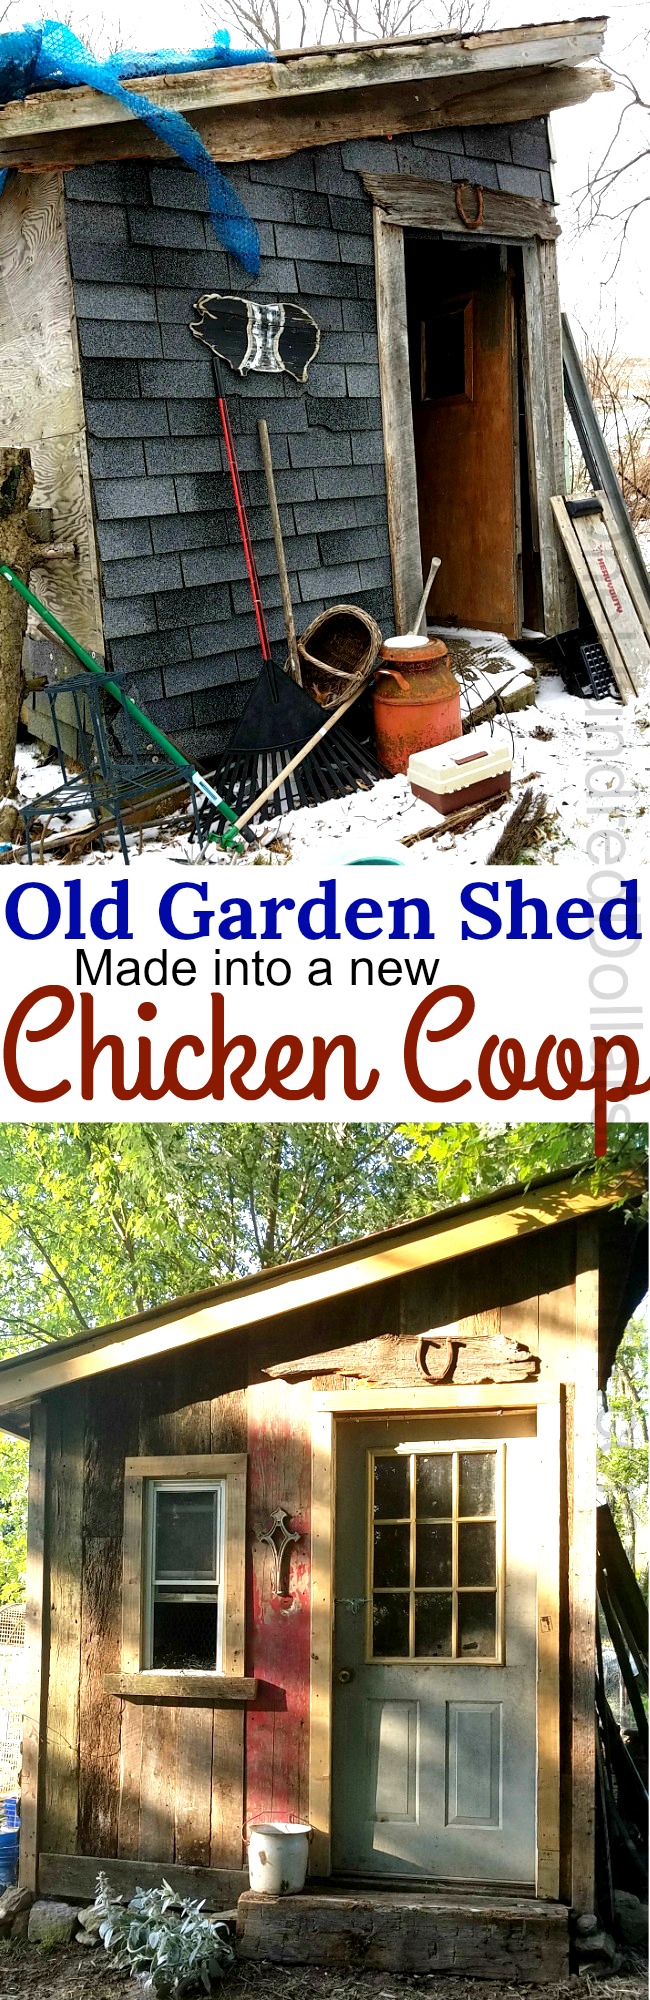 Peggy Shares How Her Husband Turned an Old Garden Shed into a New Chicken Coop